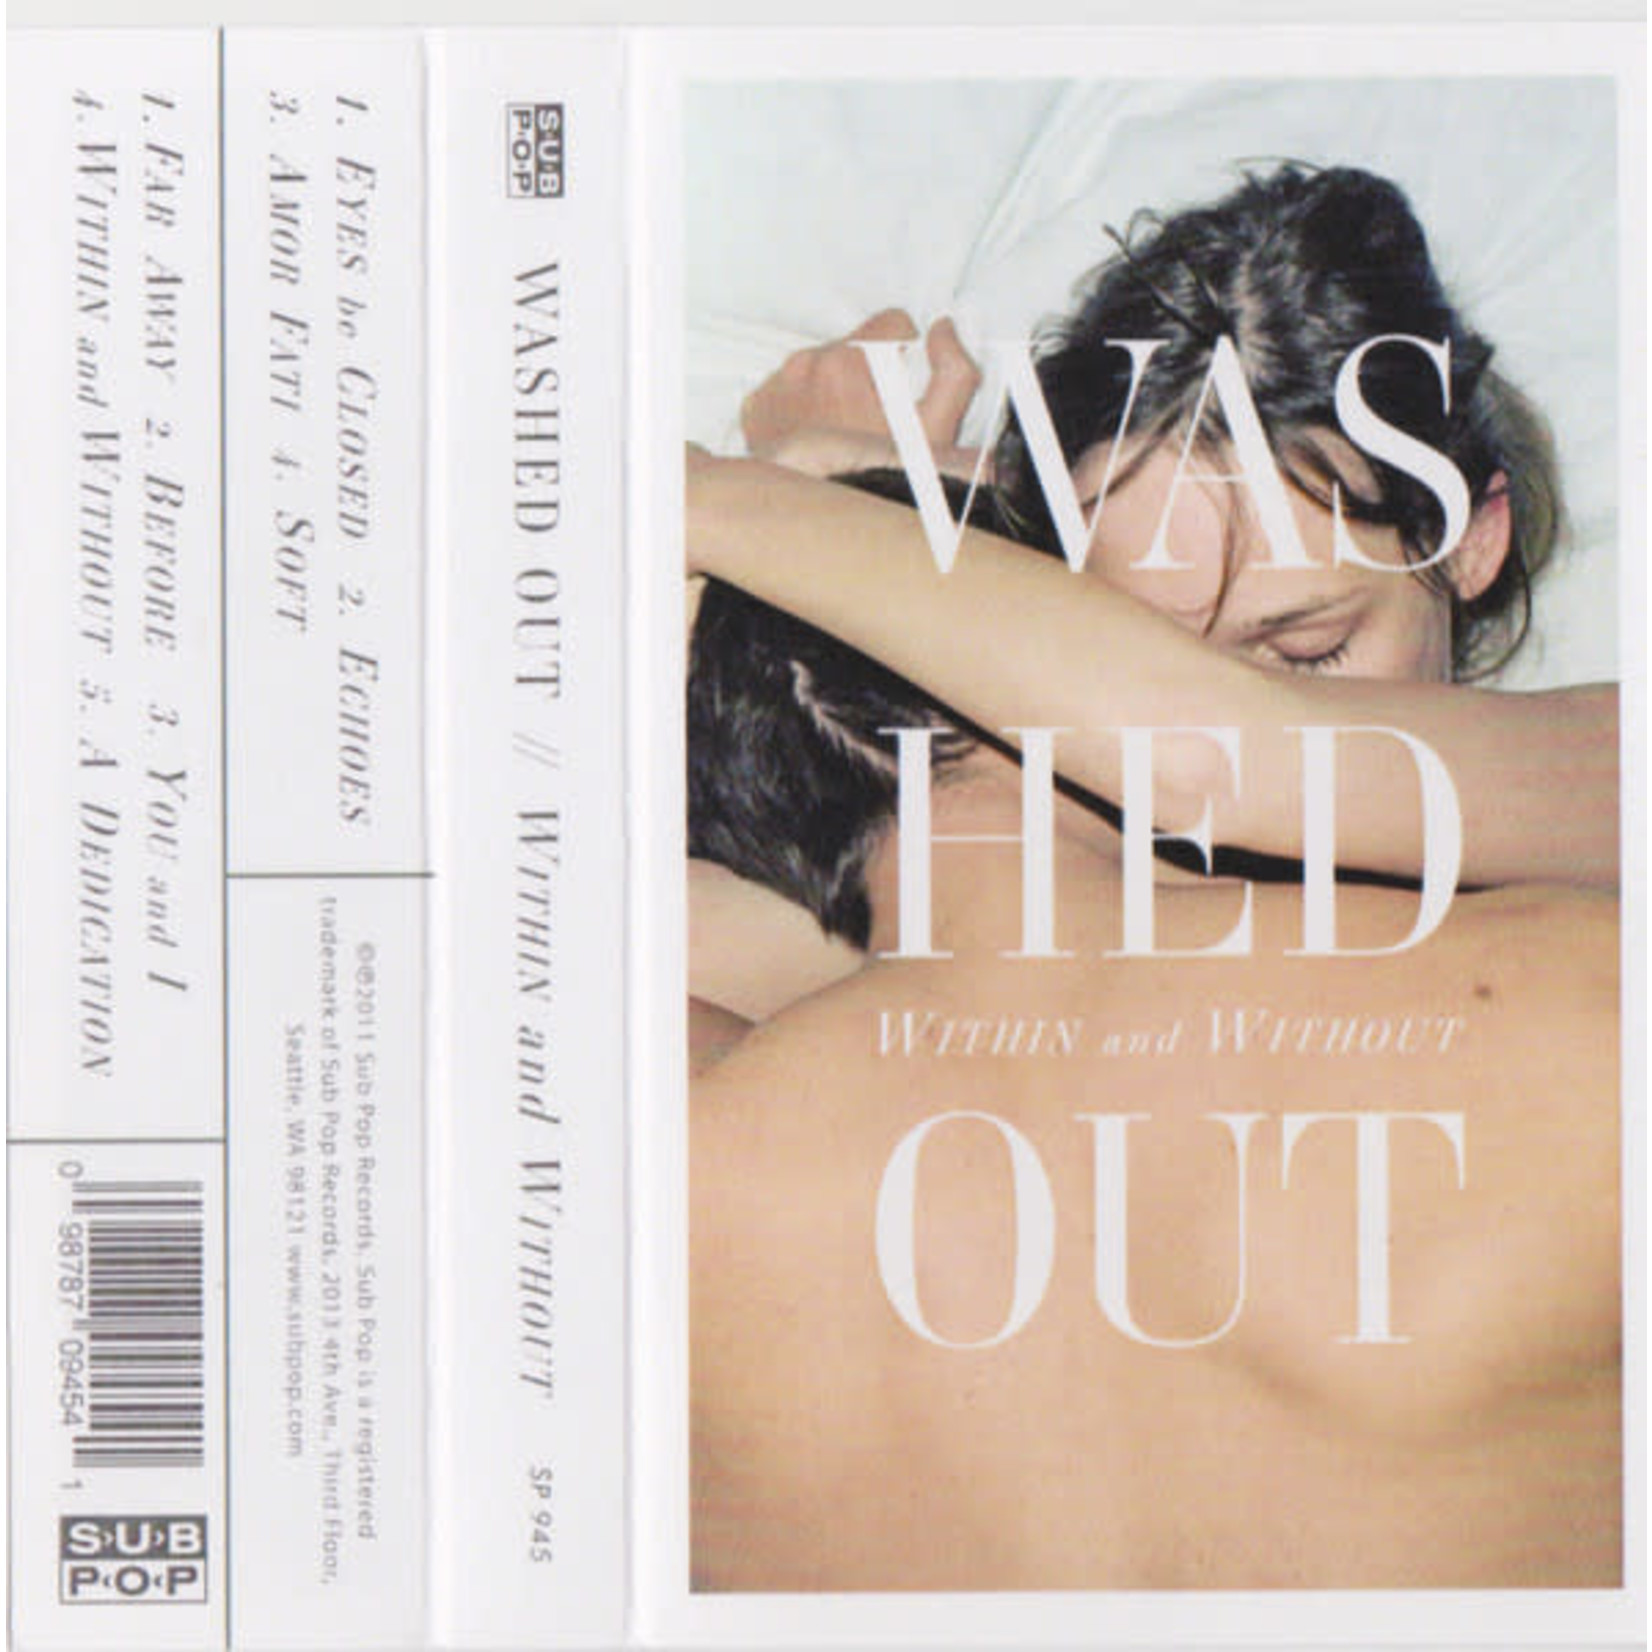 Sub Pop Washed Out - Within and Without (Tape)